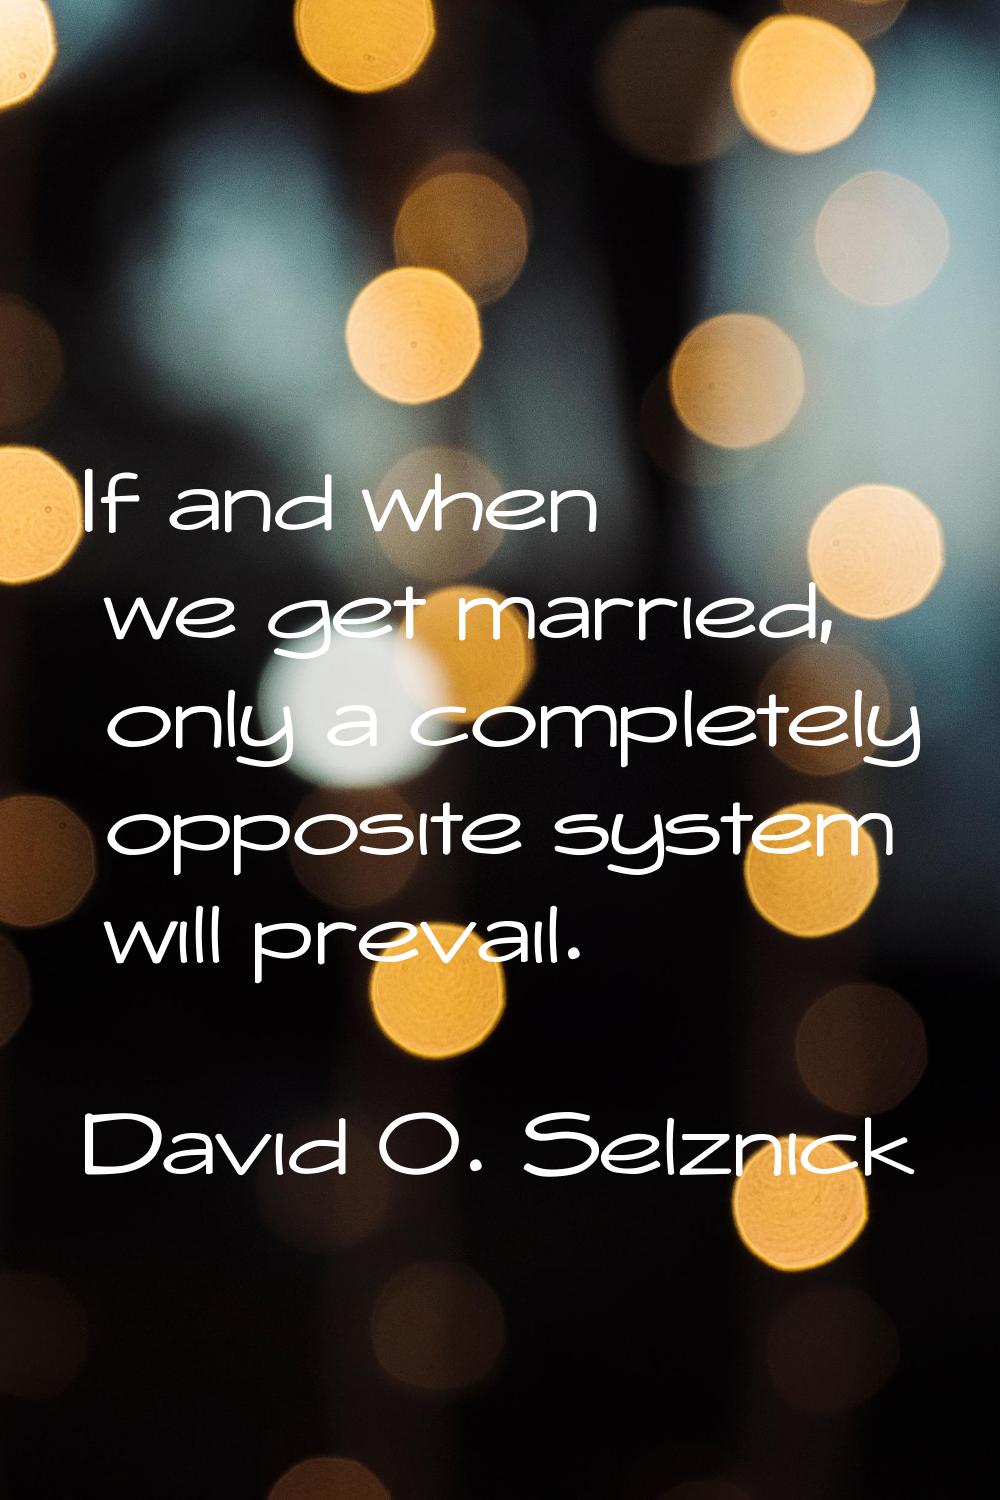 If and when we get married, only a completely opposite system will prevail.